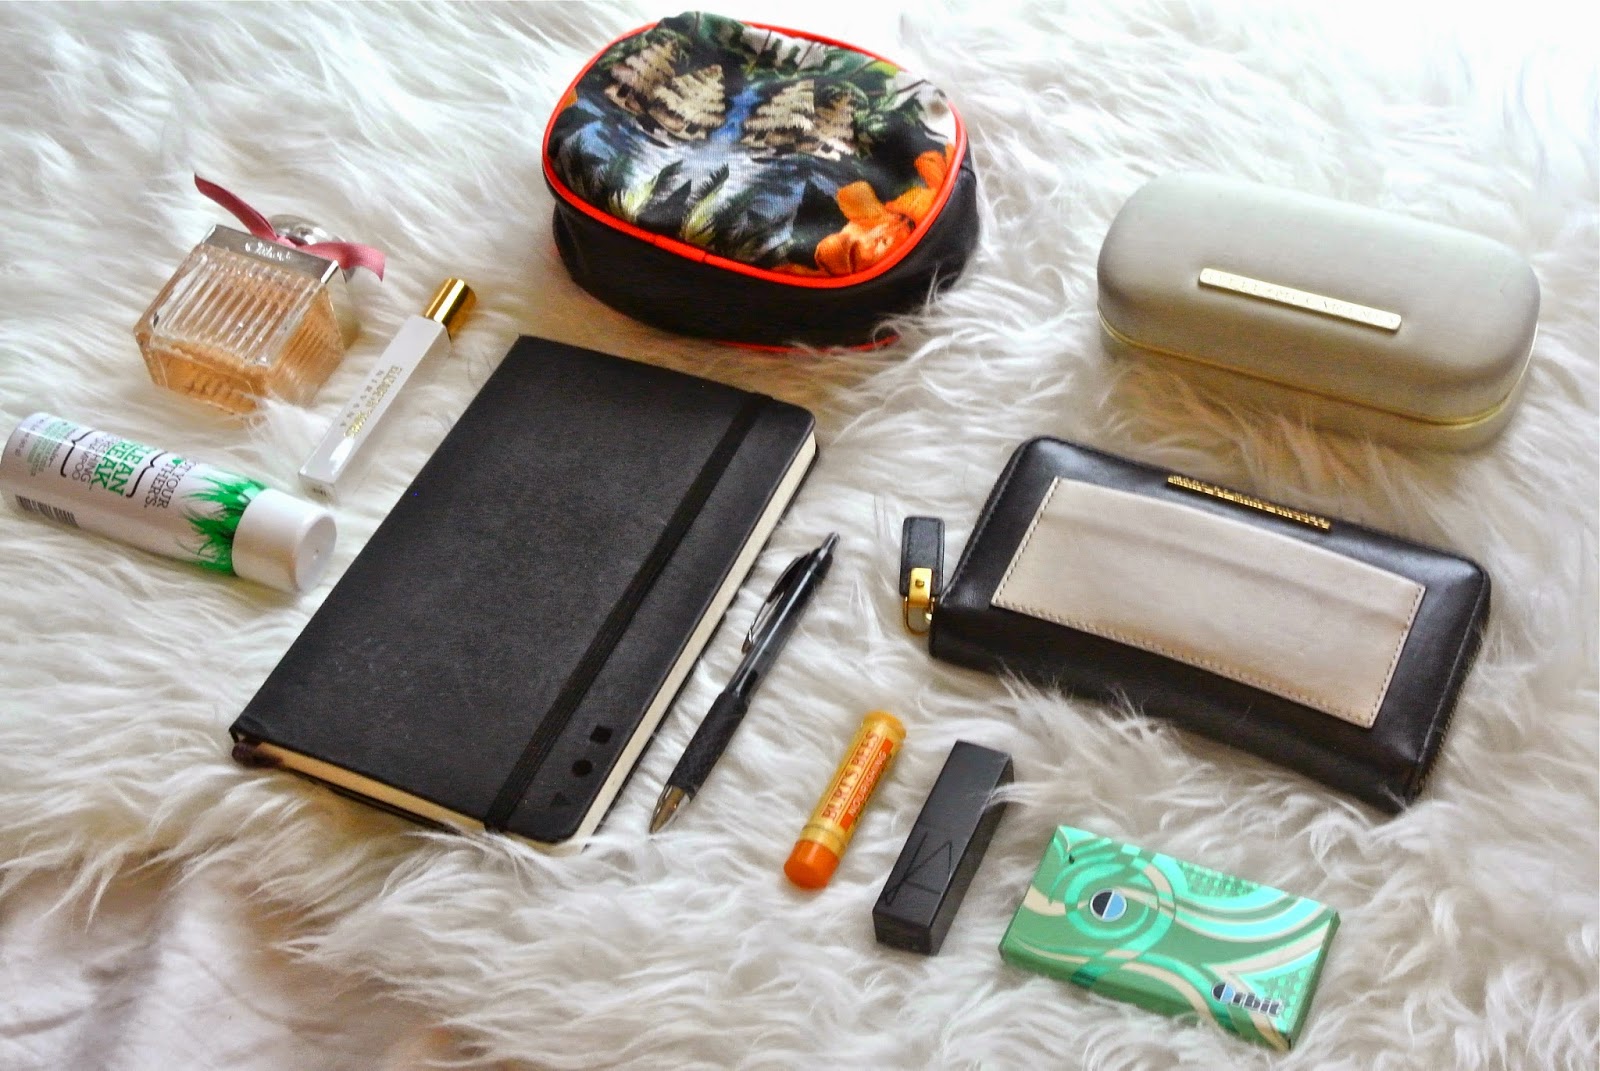 The Garment Rack: What's In My Bag?